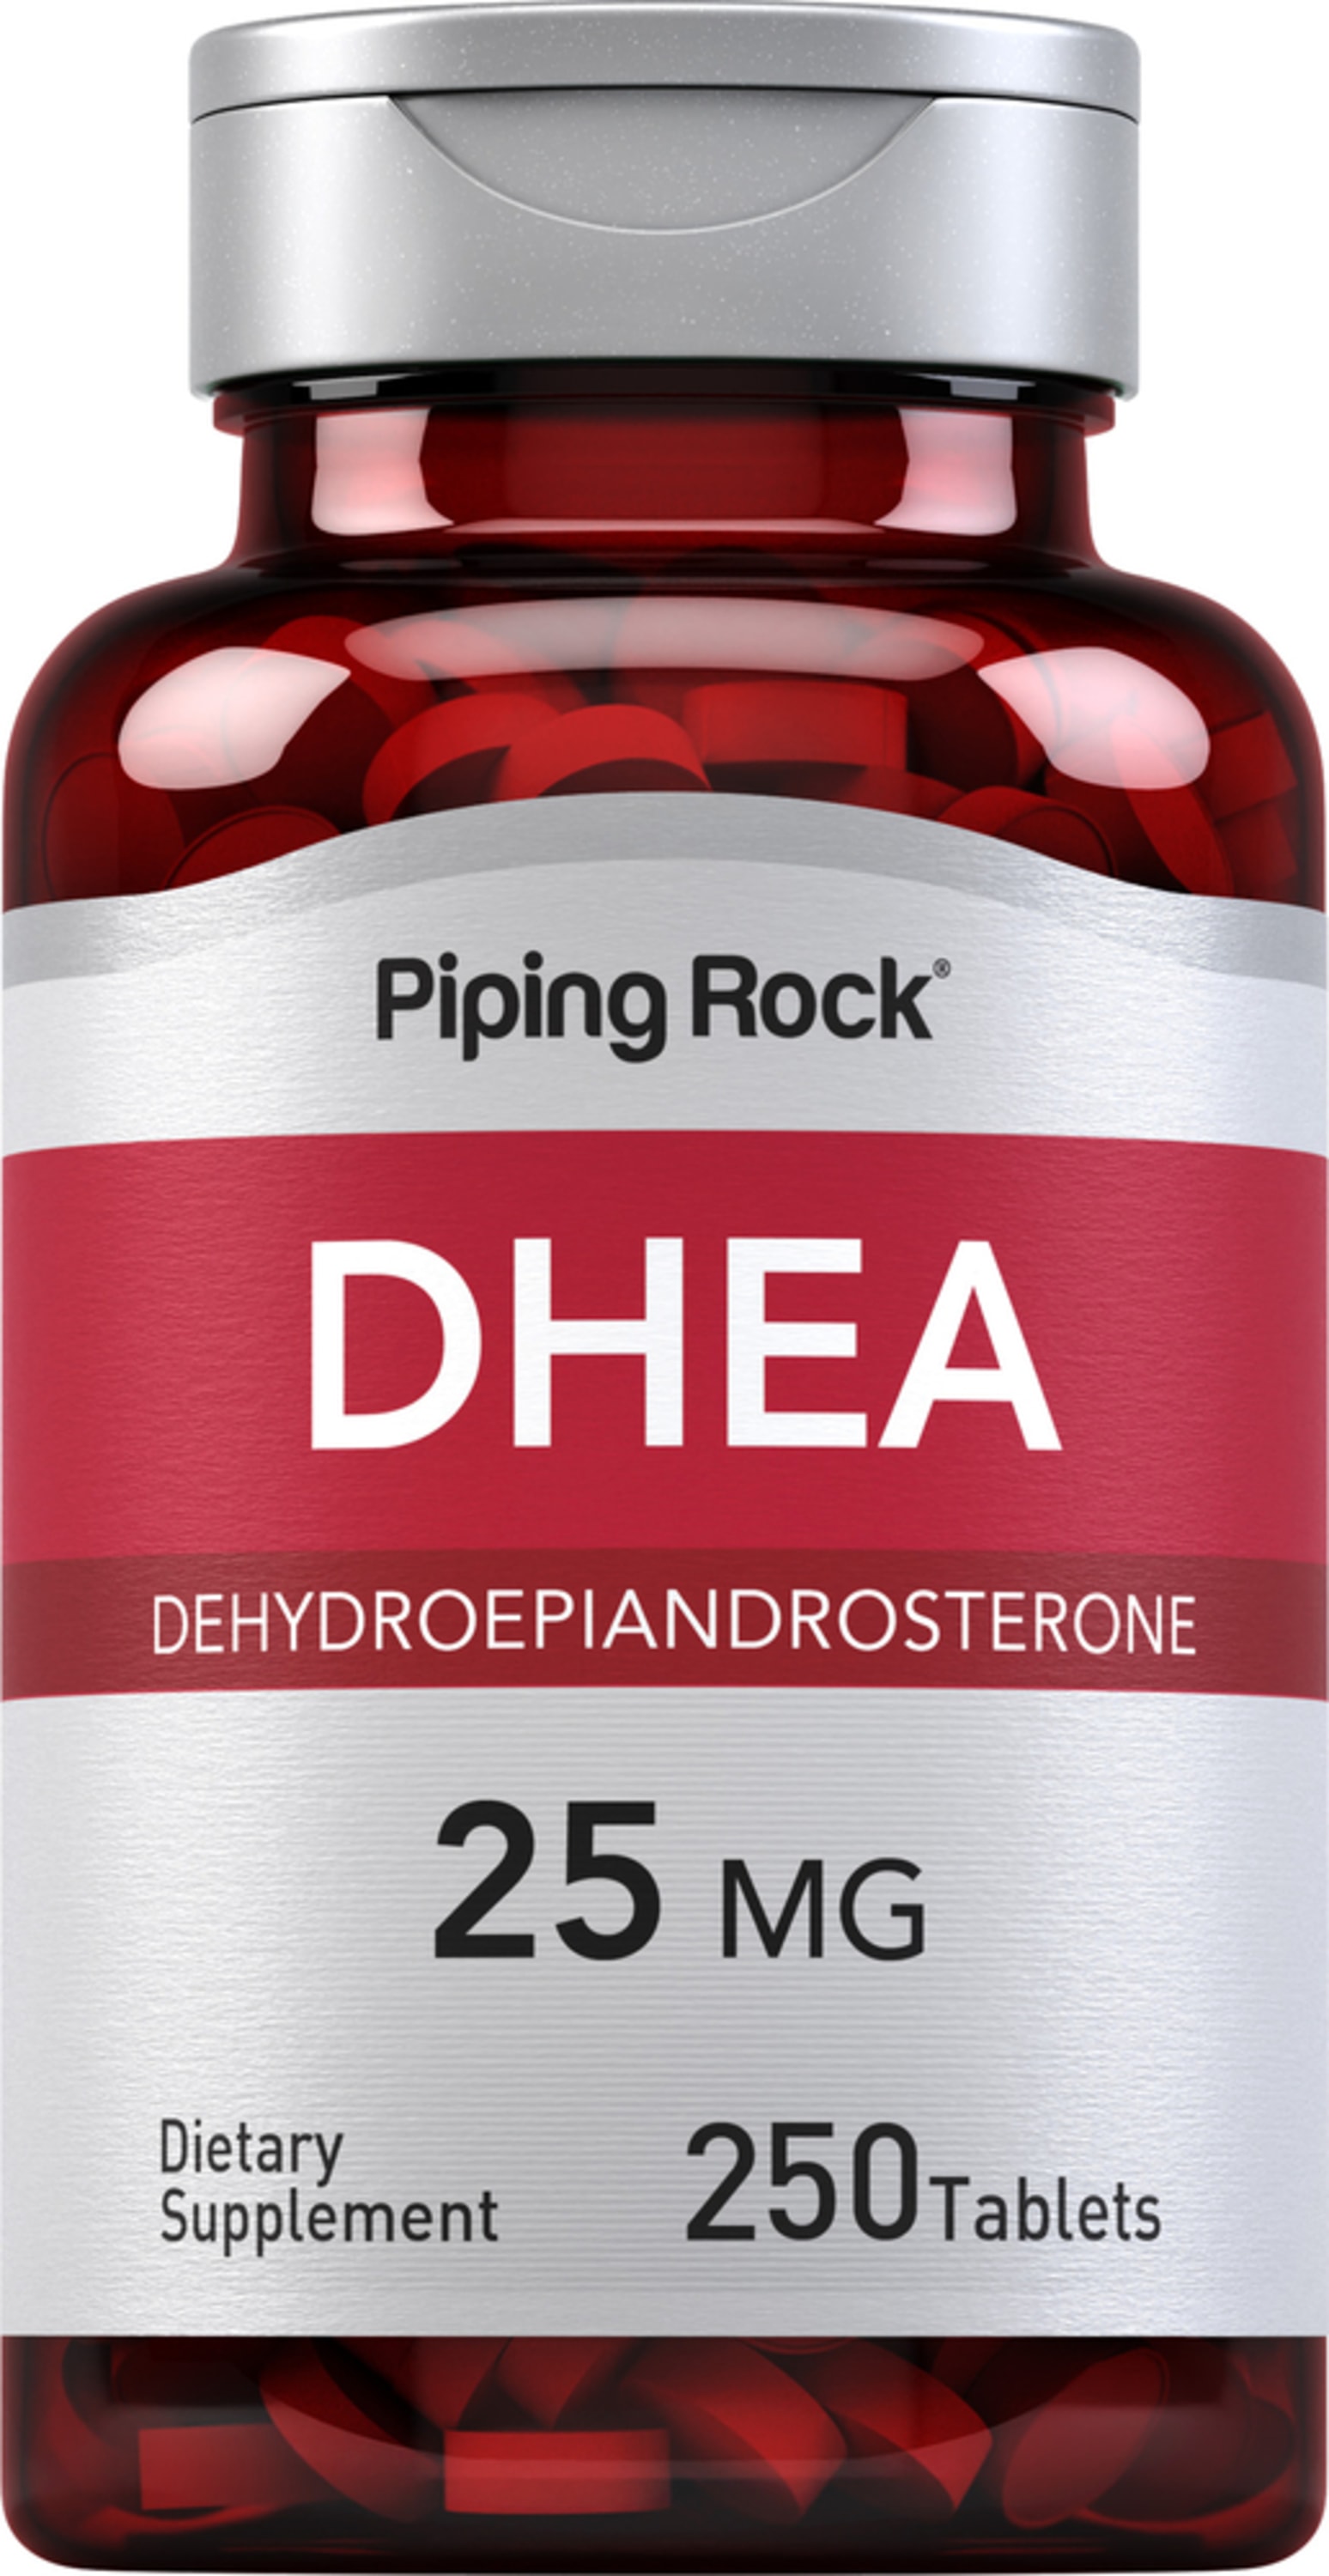 DHEA 25 Nutritional Supplement